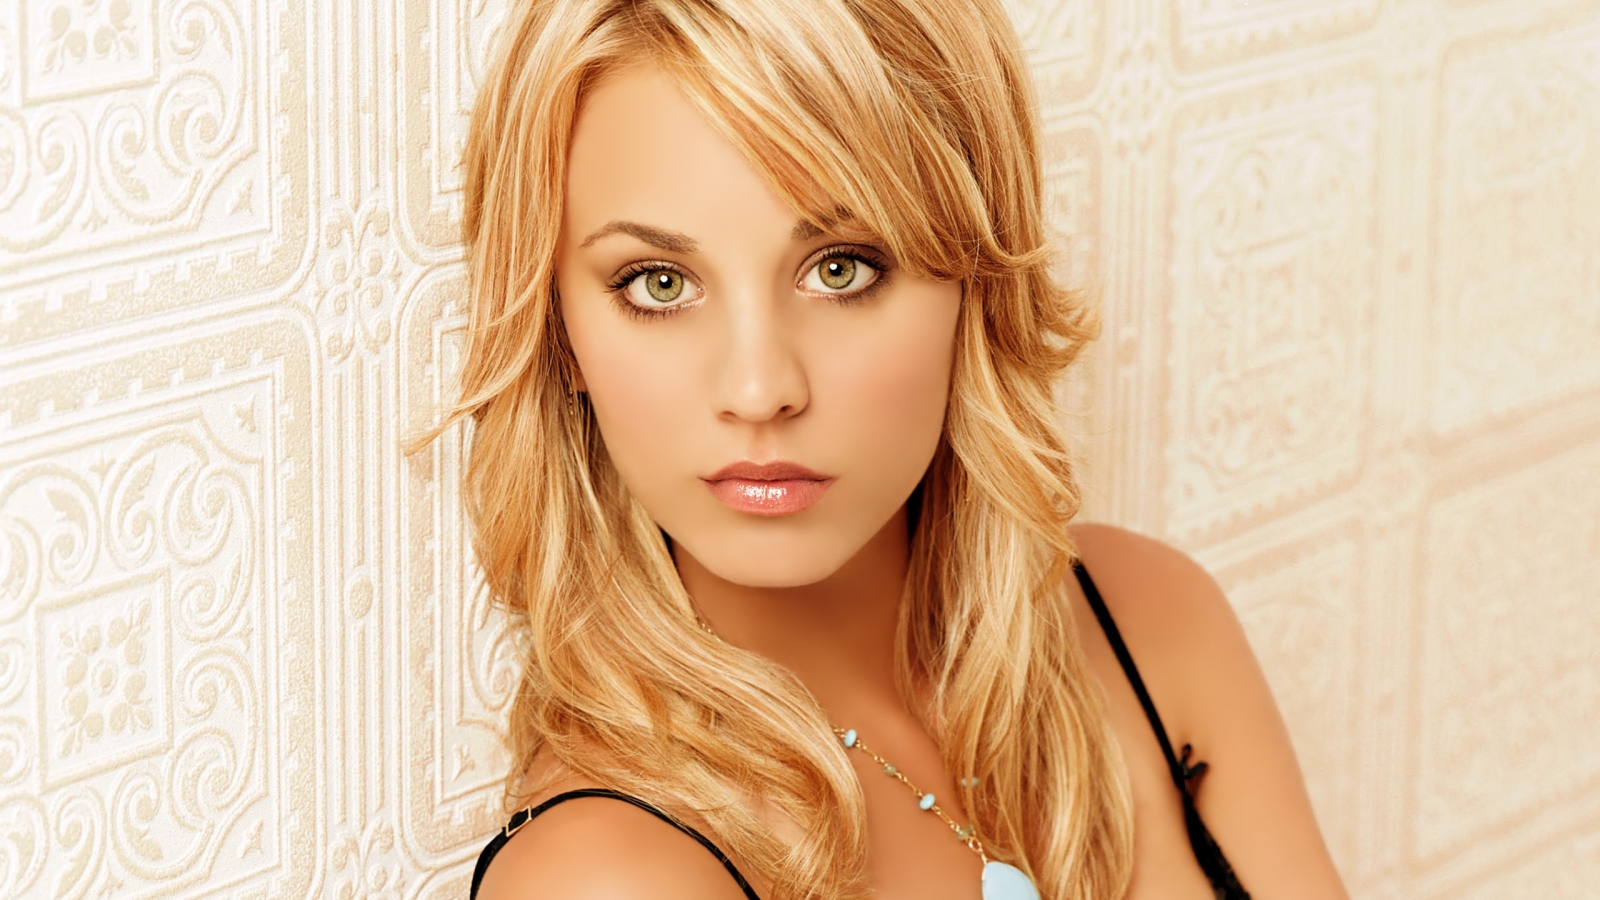 Beautiful Kaley Cuoco for 1600 x 900 HDTV resolution